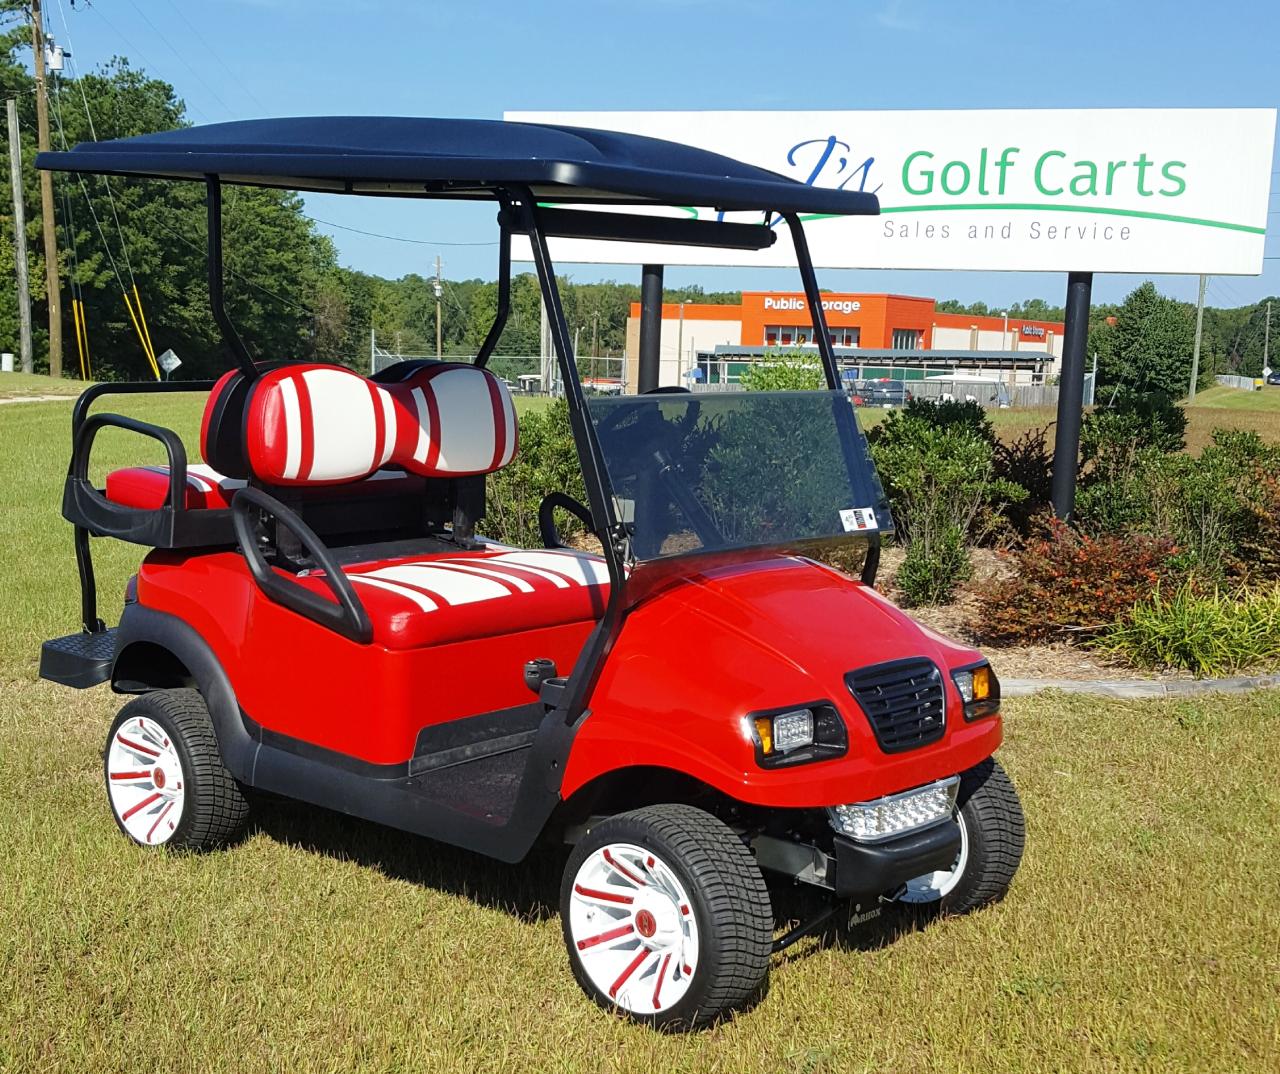 Used Golf Carts for Sale by Owner in Lawrence, South Dakota: A Buyer's Guide